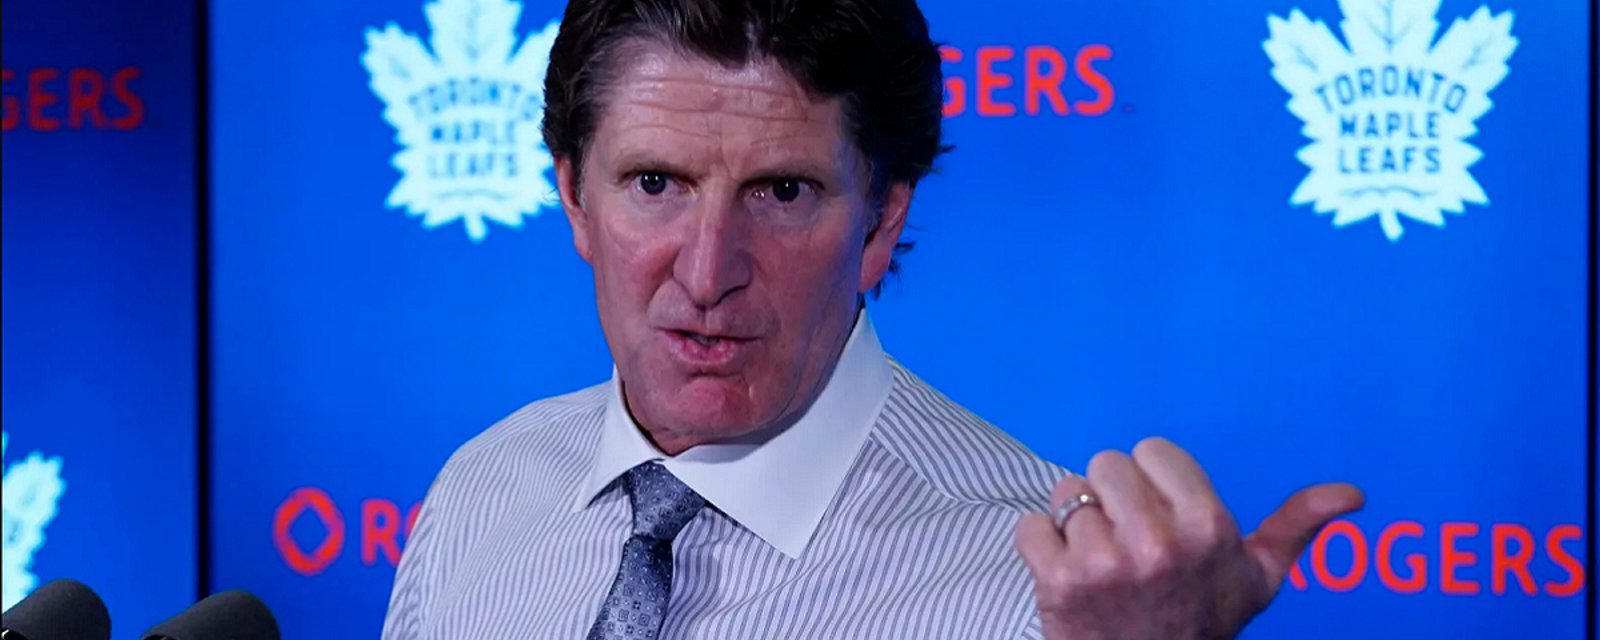 Rumor: Mike Babcock mentioned as candidate for potential coaching change.